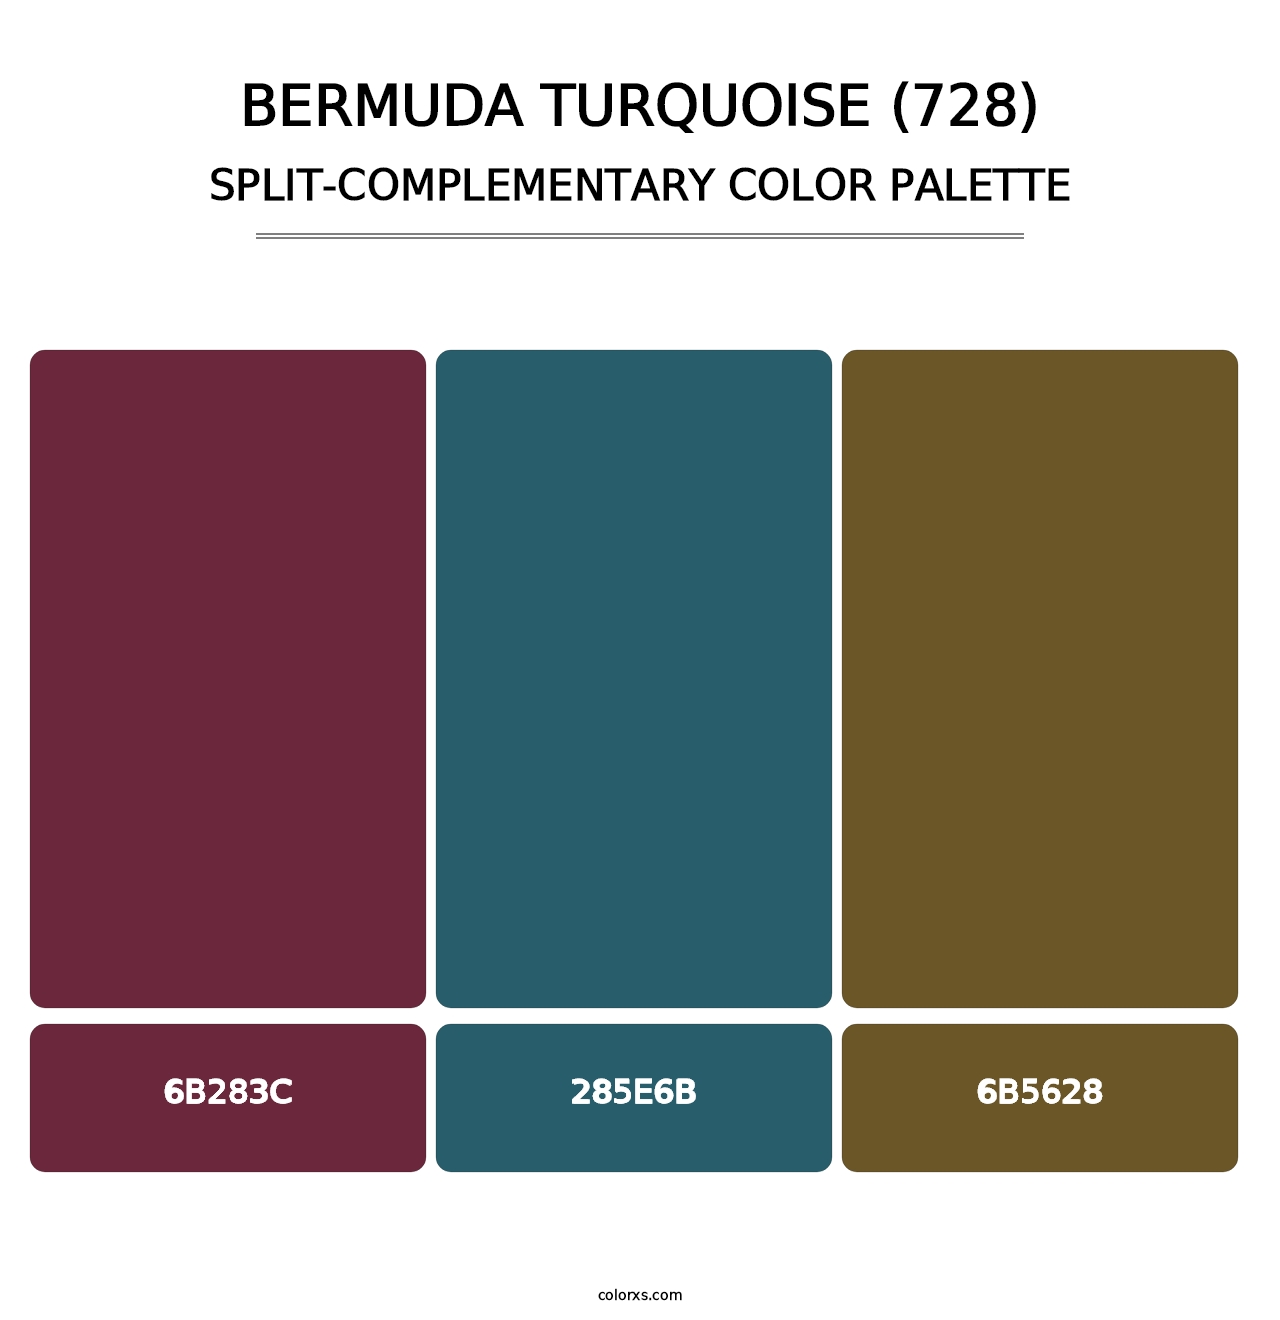 Bermuda Turquoise (728) - Split-Complementary Color Palette